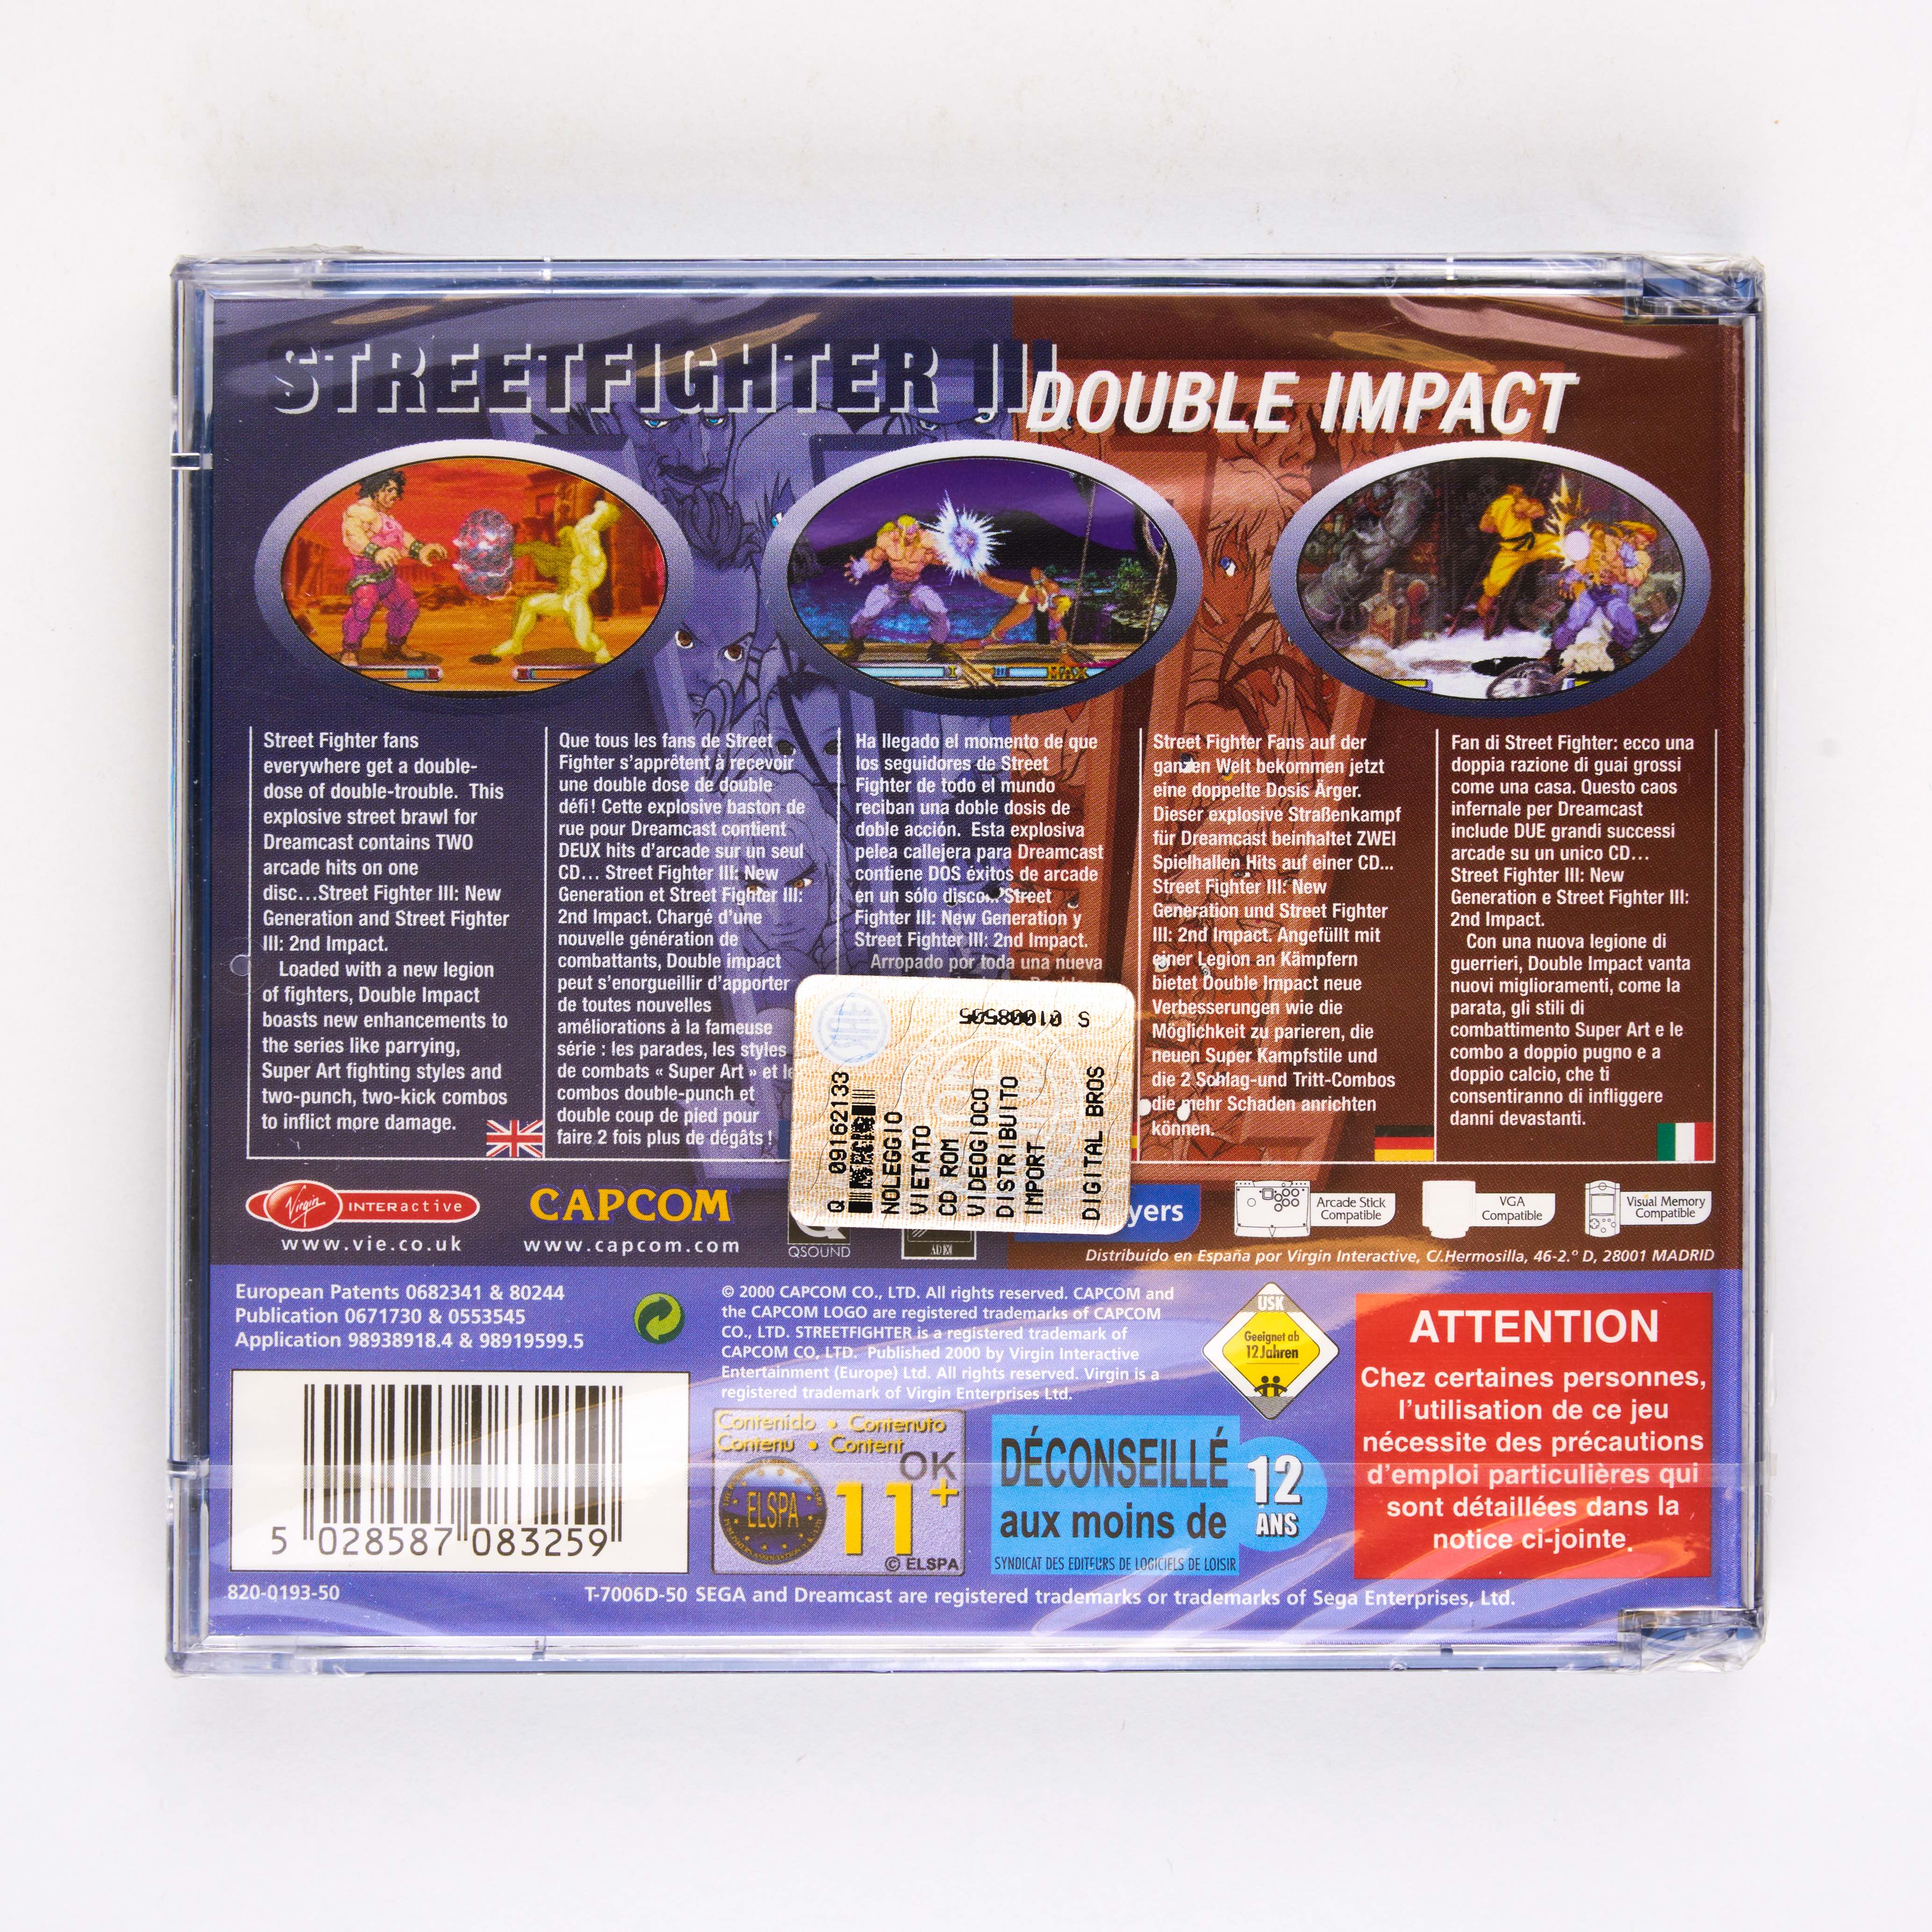 SEGA - Street Fighter III Double Impact - Dreamcast - Sealed - Image 2 of 2